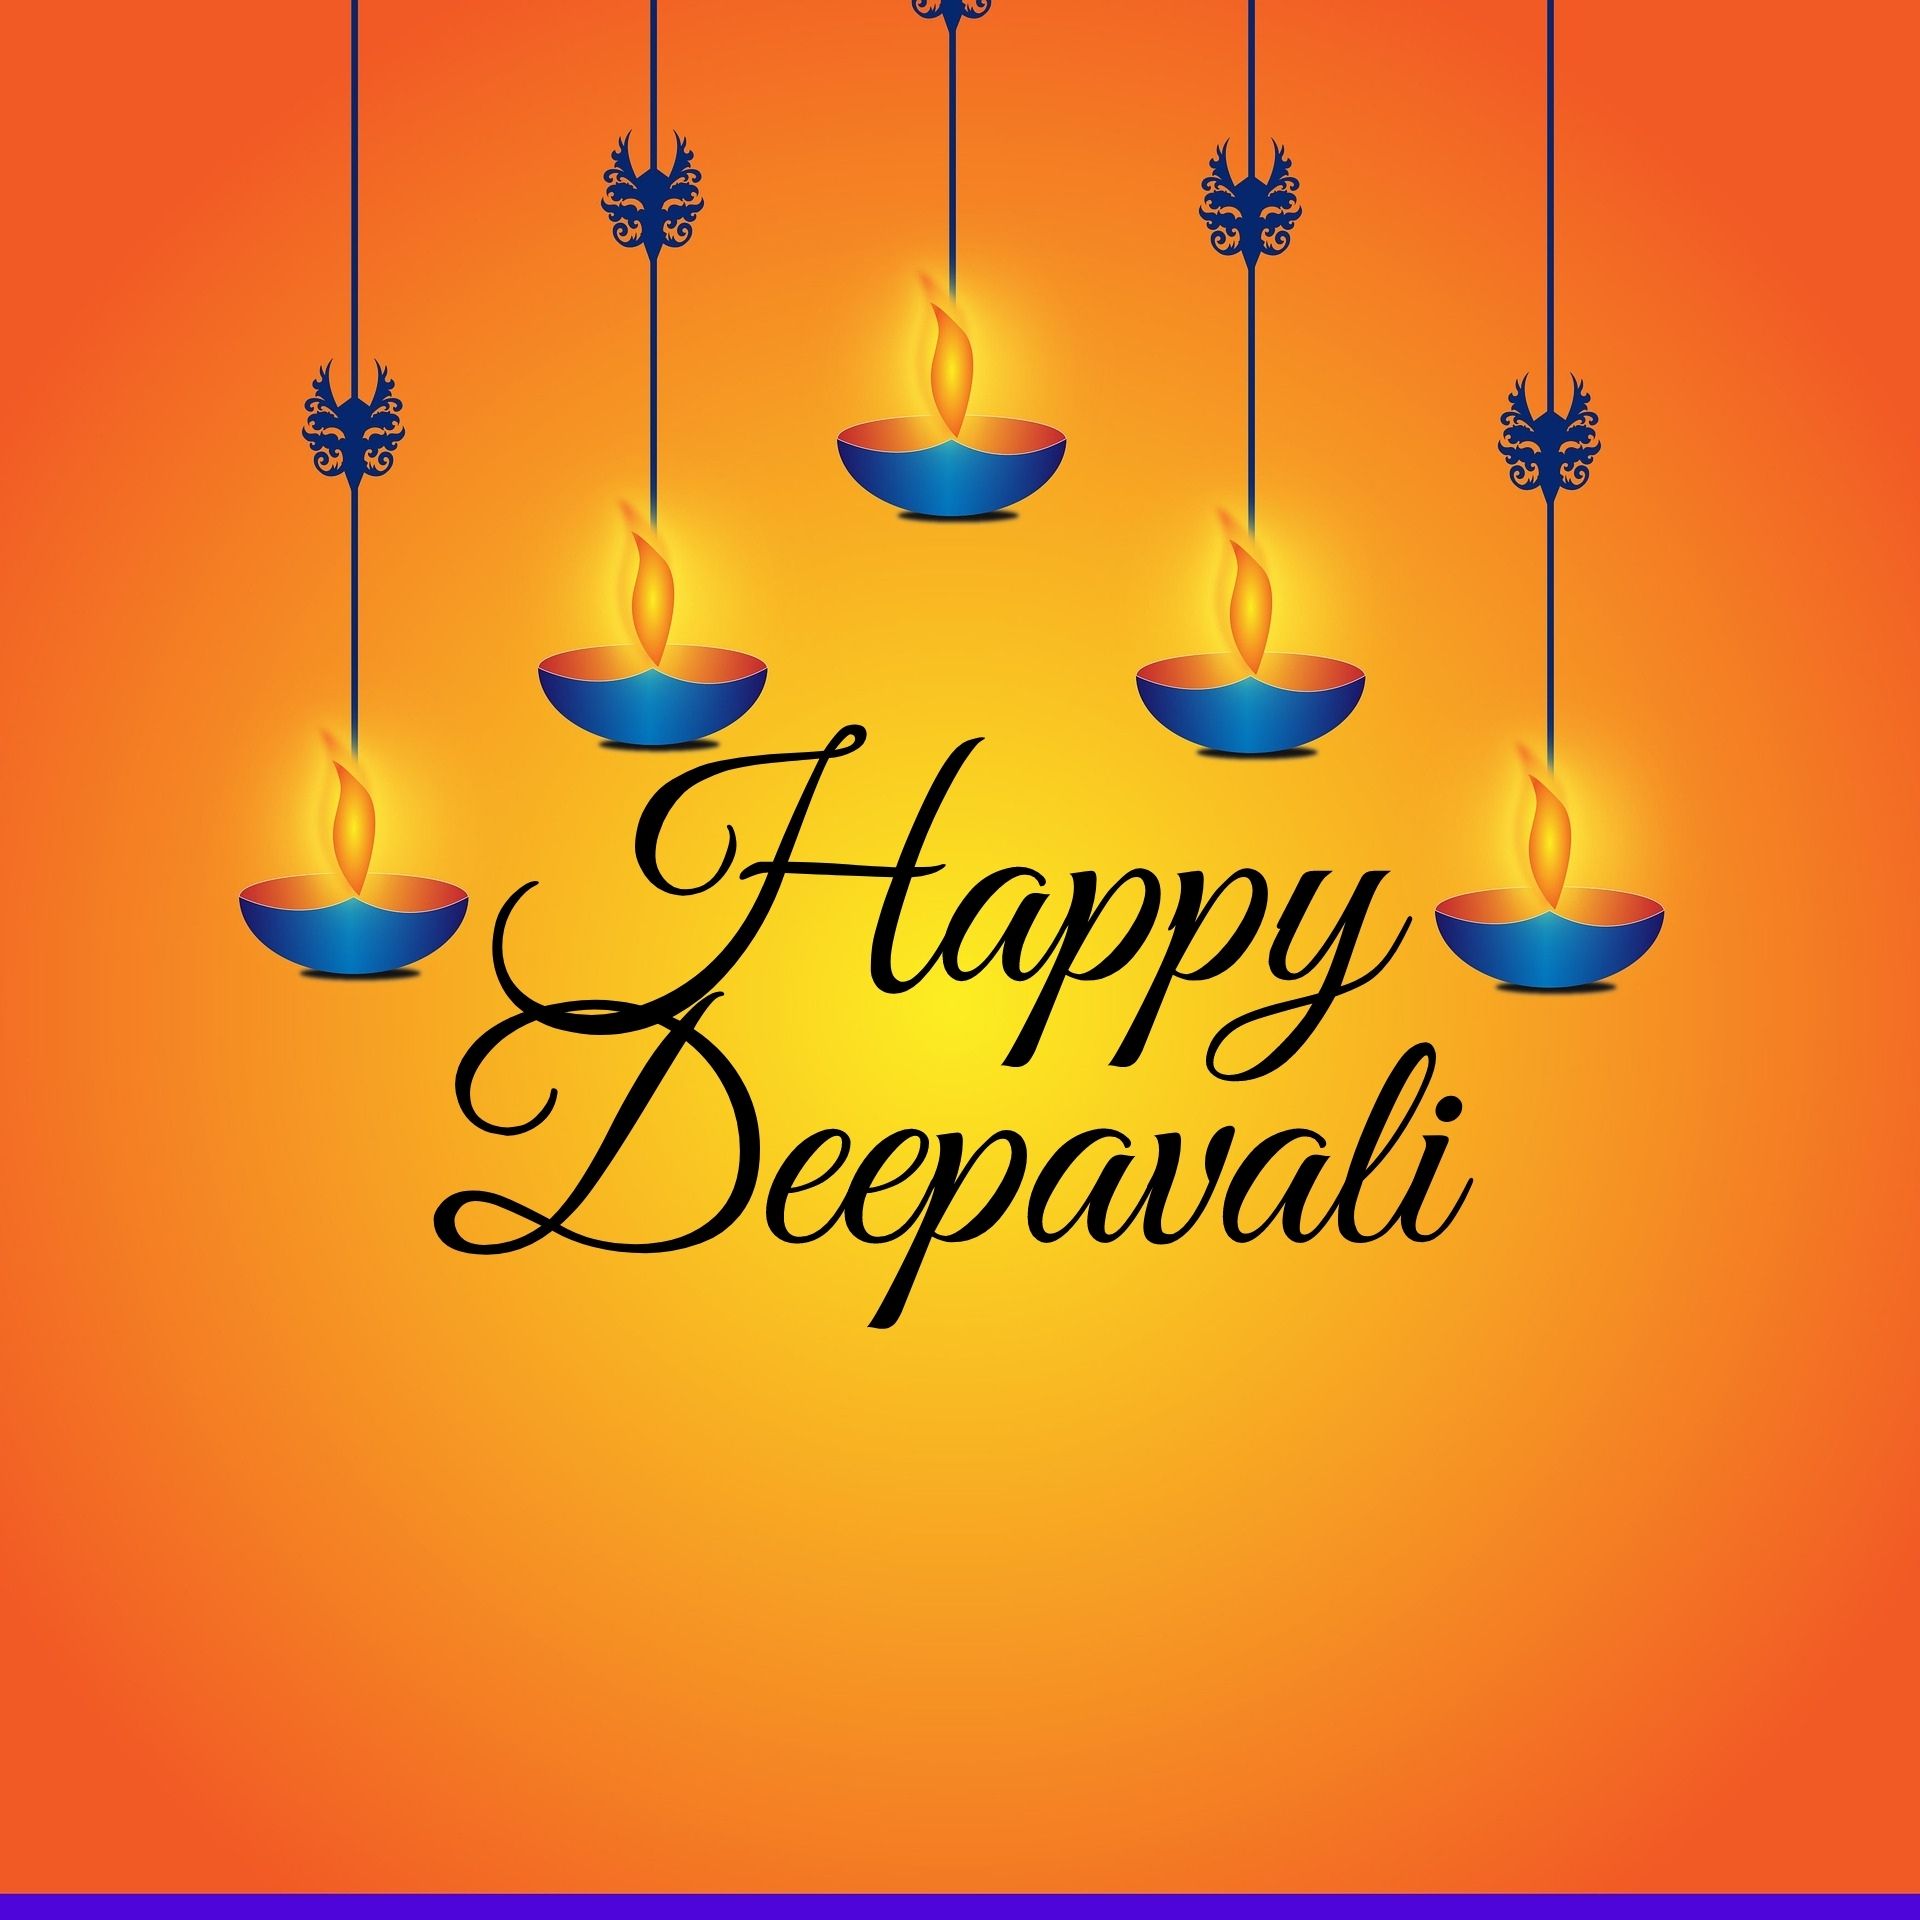 Happy Diwali Wishes In English With Images And Pictures For Diwali ...